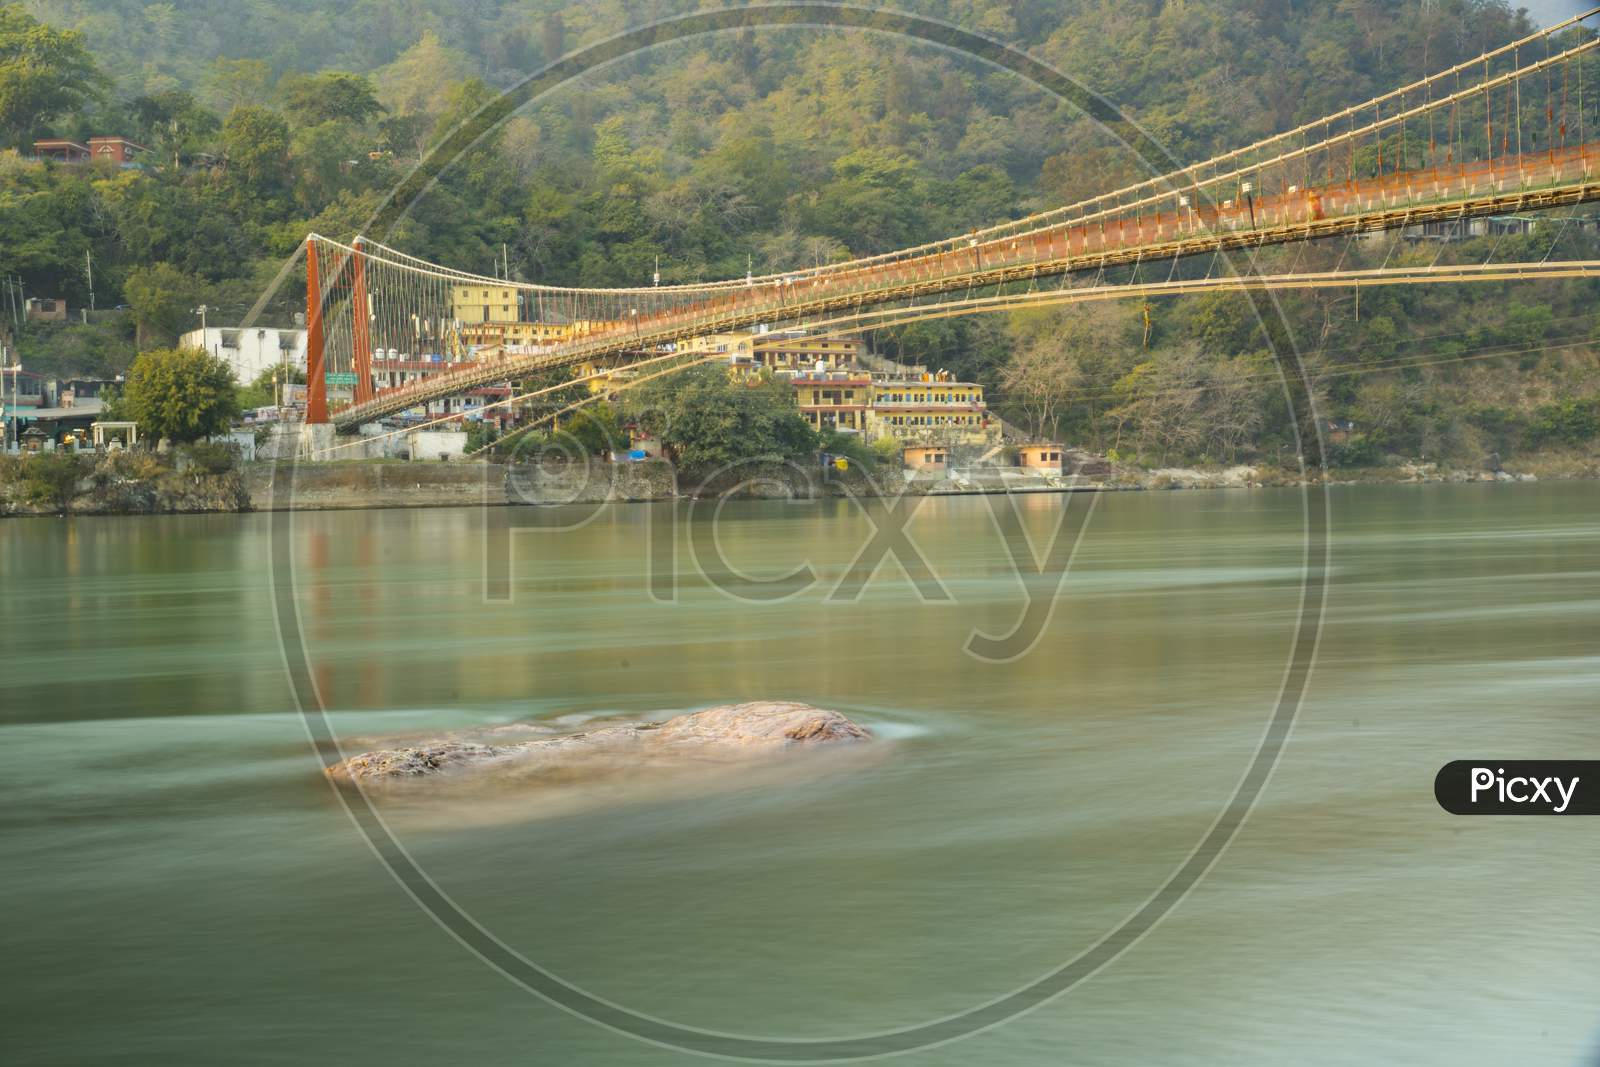 Ram Jhula and Laxman Jhula is an iron suspension bridge across the river Ganges,